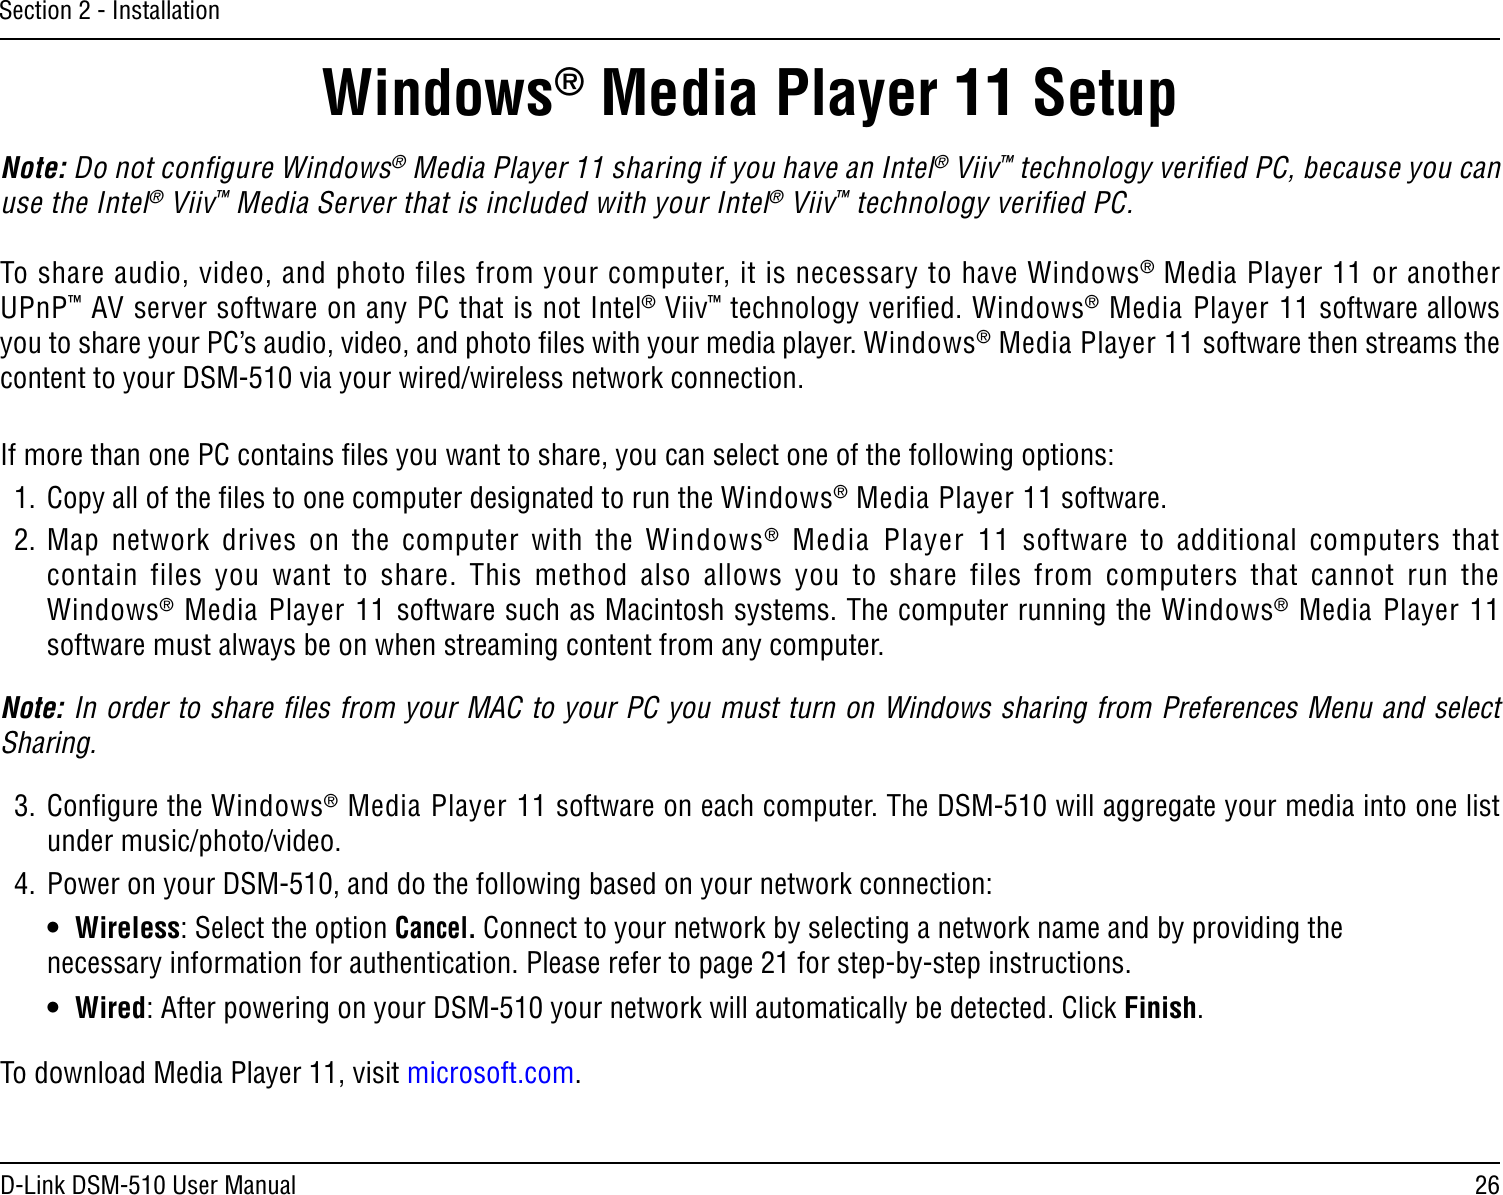 26D-Link DSM-510 User ManualSection 2 - InstallationNote: Do not conﬁgure Windows® Media Player 11 sharing if you have an Intel® Viiv™ technology veriﬁed PC, because you can use the Intel® Viiv™ Media Server that is included with your Intel® Viiv™ technology veriﬁed PC.To share audio, video, and photo files from your computer, it is necessary to have Windows® Media Player 11 or another UPnP™ AV server software on any PC that is not Intel® Viiv™ technology veriﬁed. Windows® Media Player 11 software allows you to share your PC’s audio, video, and photo ﬁles with your media player. Windows® Media Player 11 software then streams the content to your DSM-510 via your wired/wireless network connection. If more than one PC contains ﬁles you want to share, you can select one of the following options:1.  Copy all of the ﬁles to one computer designated to run the Windows® Media Player 11 software.2. Map  network  drives  on  the  computer  with  the  Windows®  Media  Player  11  software  to  additional  computers  that contain  files  you  want  to  share.  This  method  also  allows  you  to  share  files  from  computers  that  cannot  run  the  Windows® Media Player 11 software such as Macintosh systems. The computer running the Windows® Media Player 11 software must always be on when streaming content from any computer.  Note: In order to share ﬁles from your MAC to your PC you must turn on Windows sharing from Preferences Menu and select Sharing.3.  Conﬁgure the Windows® Media Player 11 software on each computer. The DSM-510 will aggregate your media into one list under music/photo/video.4.  Power on your DSM-510, and do the following based on your network connection:   •  Wireless: Select the option Cancel. Connect to your network by selecting a network name and by providing the    necessary information for authentication. Please refer to page 21 for step-by-step instructions.   •  Wired: After powering on your DSM-510 your network will automatically be detected. Click Finish.Windows® Media Player 11 SetupTo download Media Player 11, visit microsoft.com.